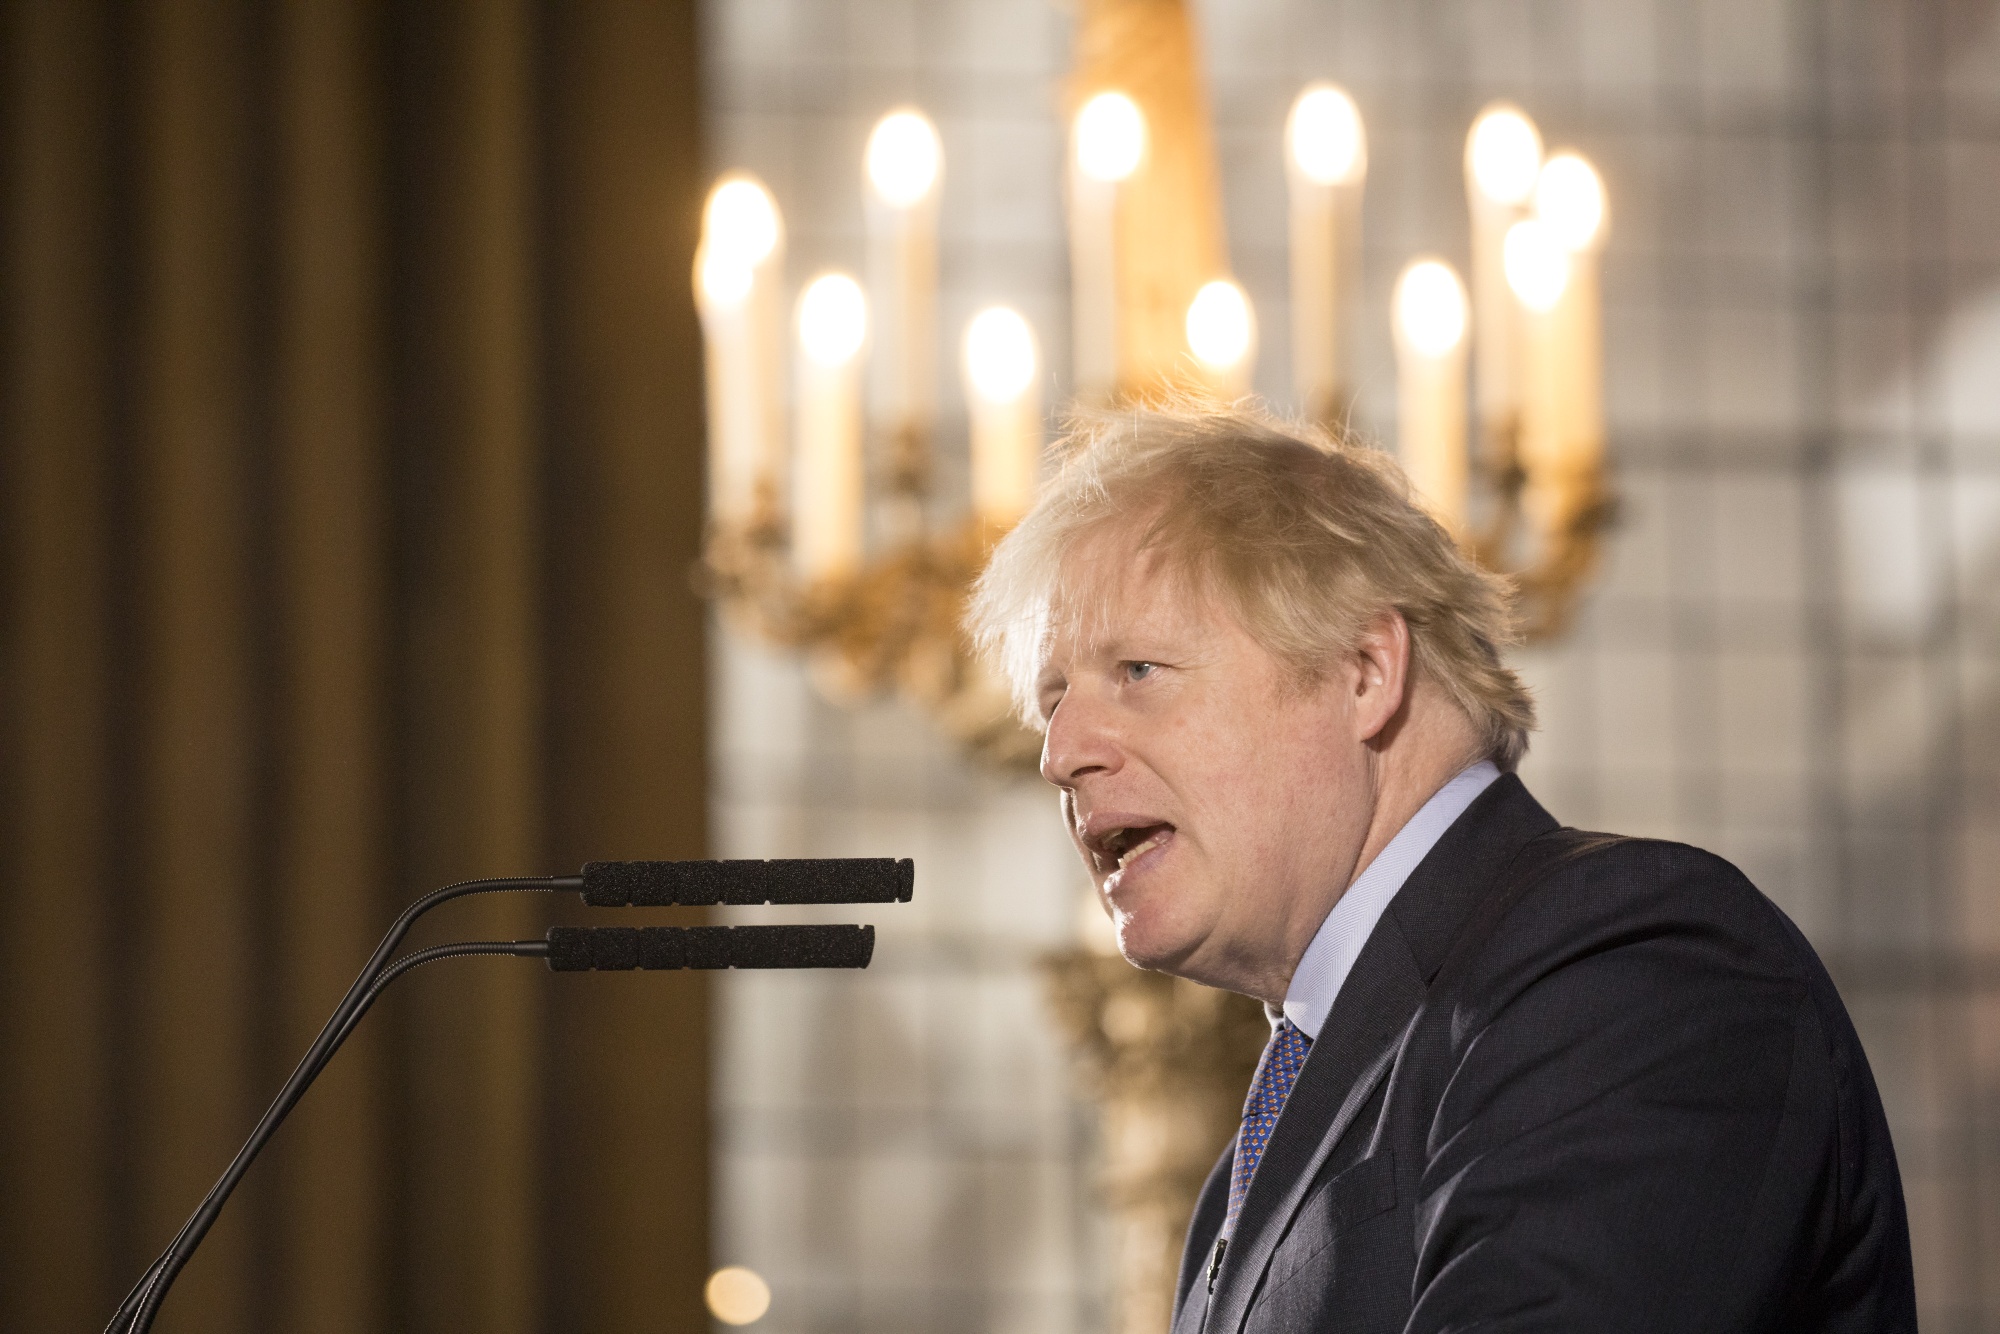 Boris Johnson, U.K. prime minister, delivers a speech on &quot;Unleashing Britain's Potential&quot; at the Old Royal Naval College in London, U.K., on Monday, Feb. 3, 2020.&nbsp;